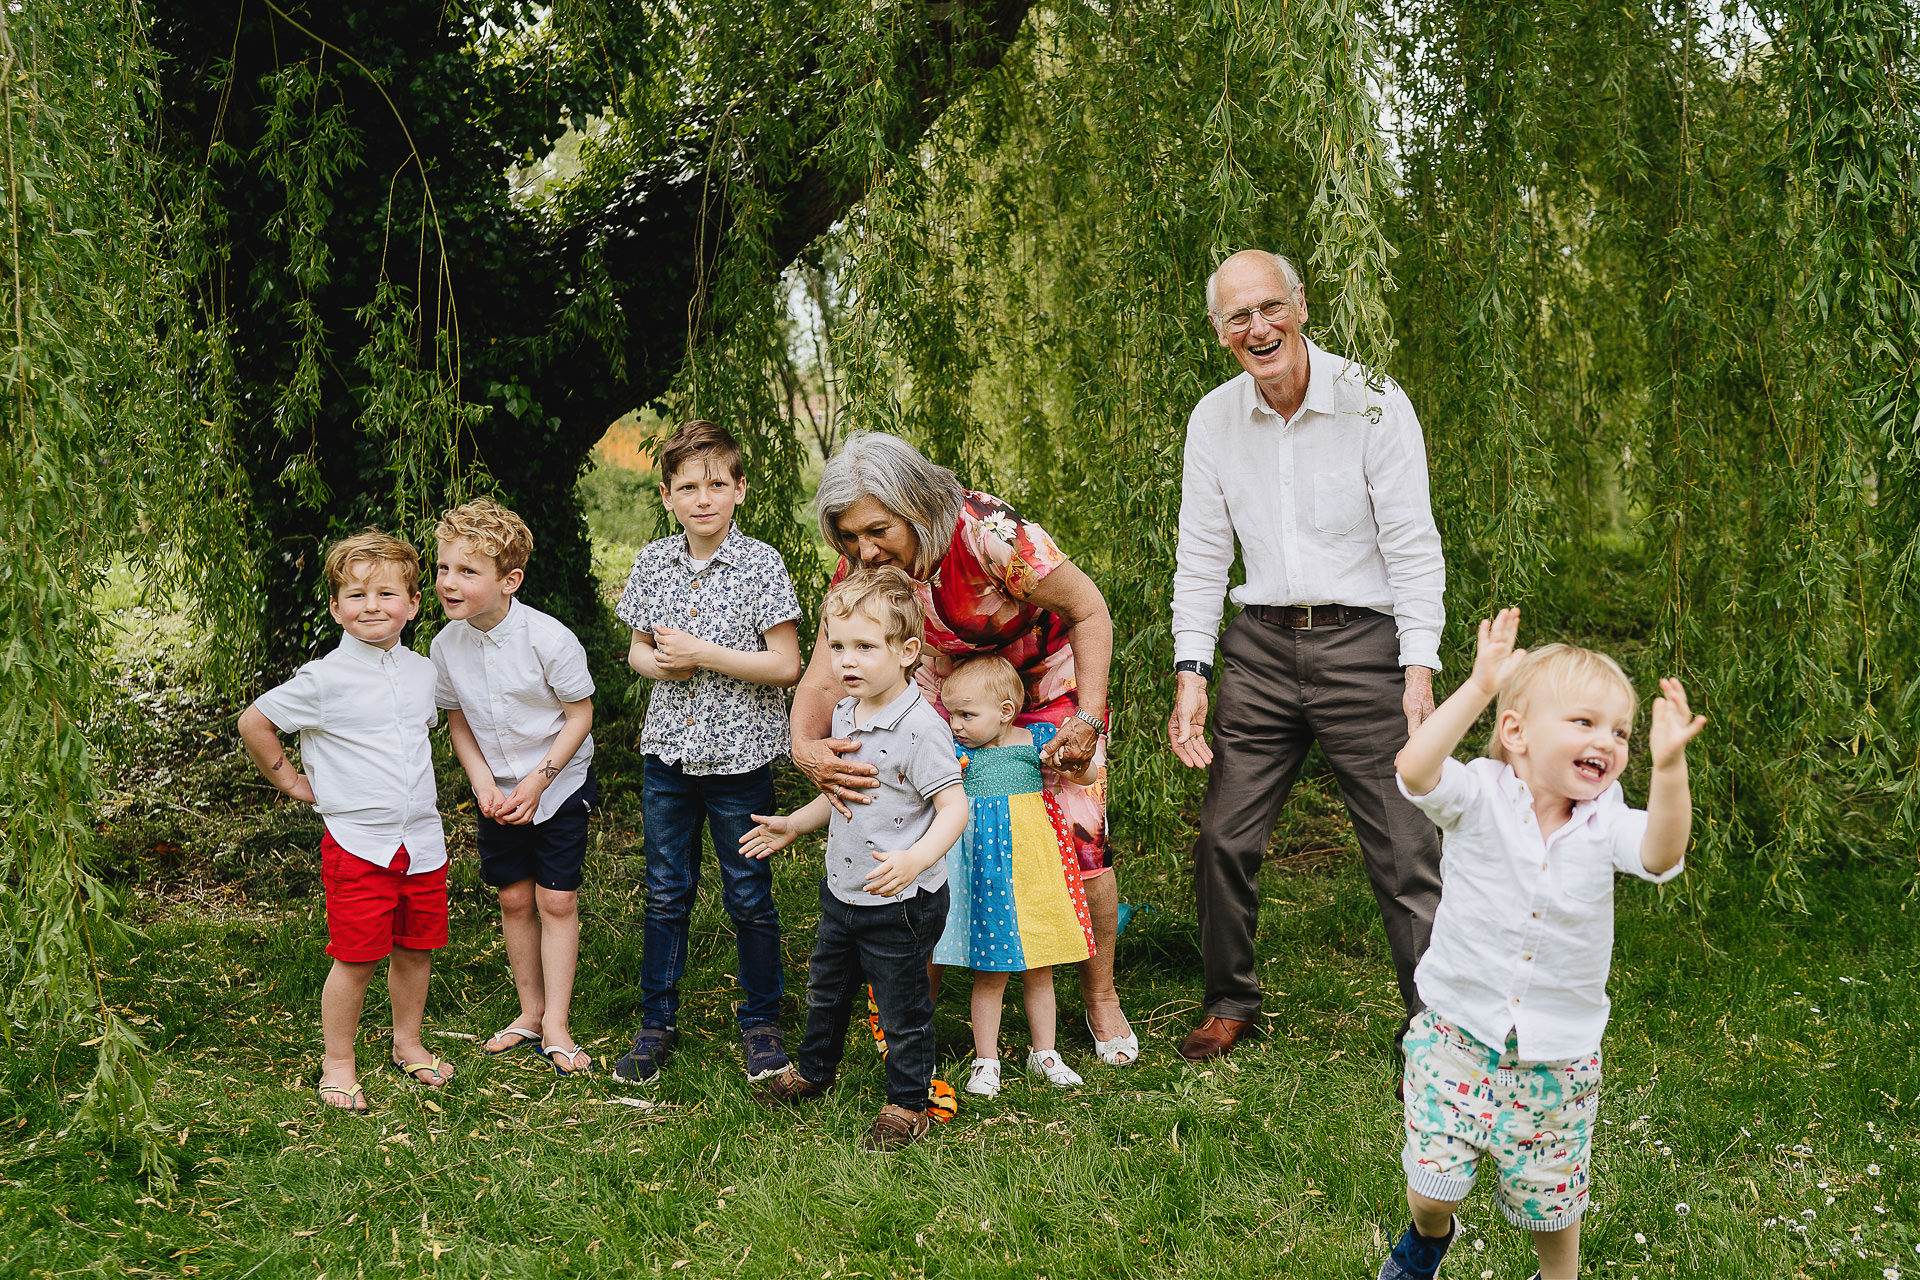 grandparents laughing at a chaotic situation with young grandchildren trying to pose for a photograph